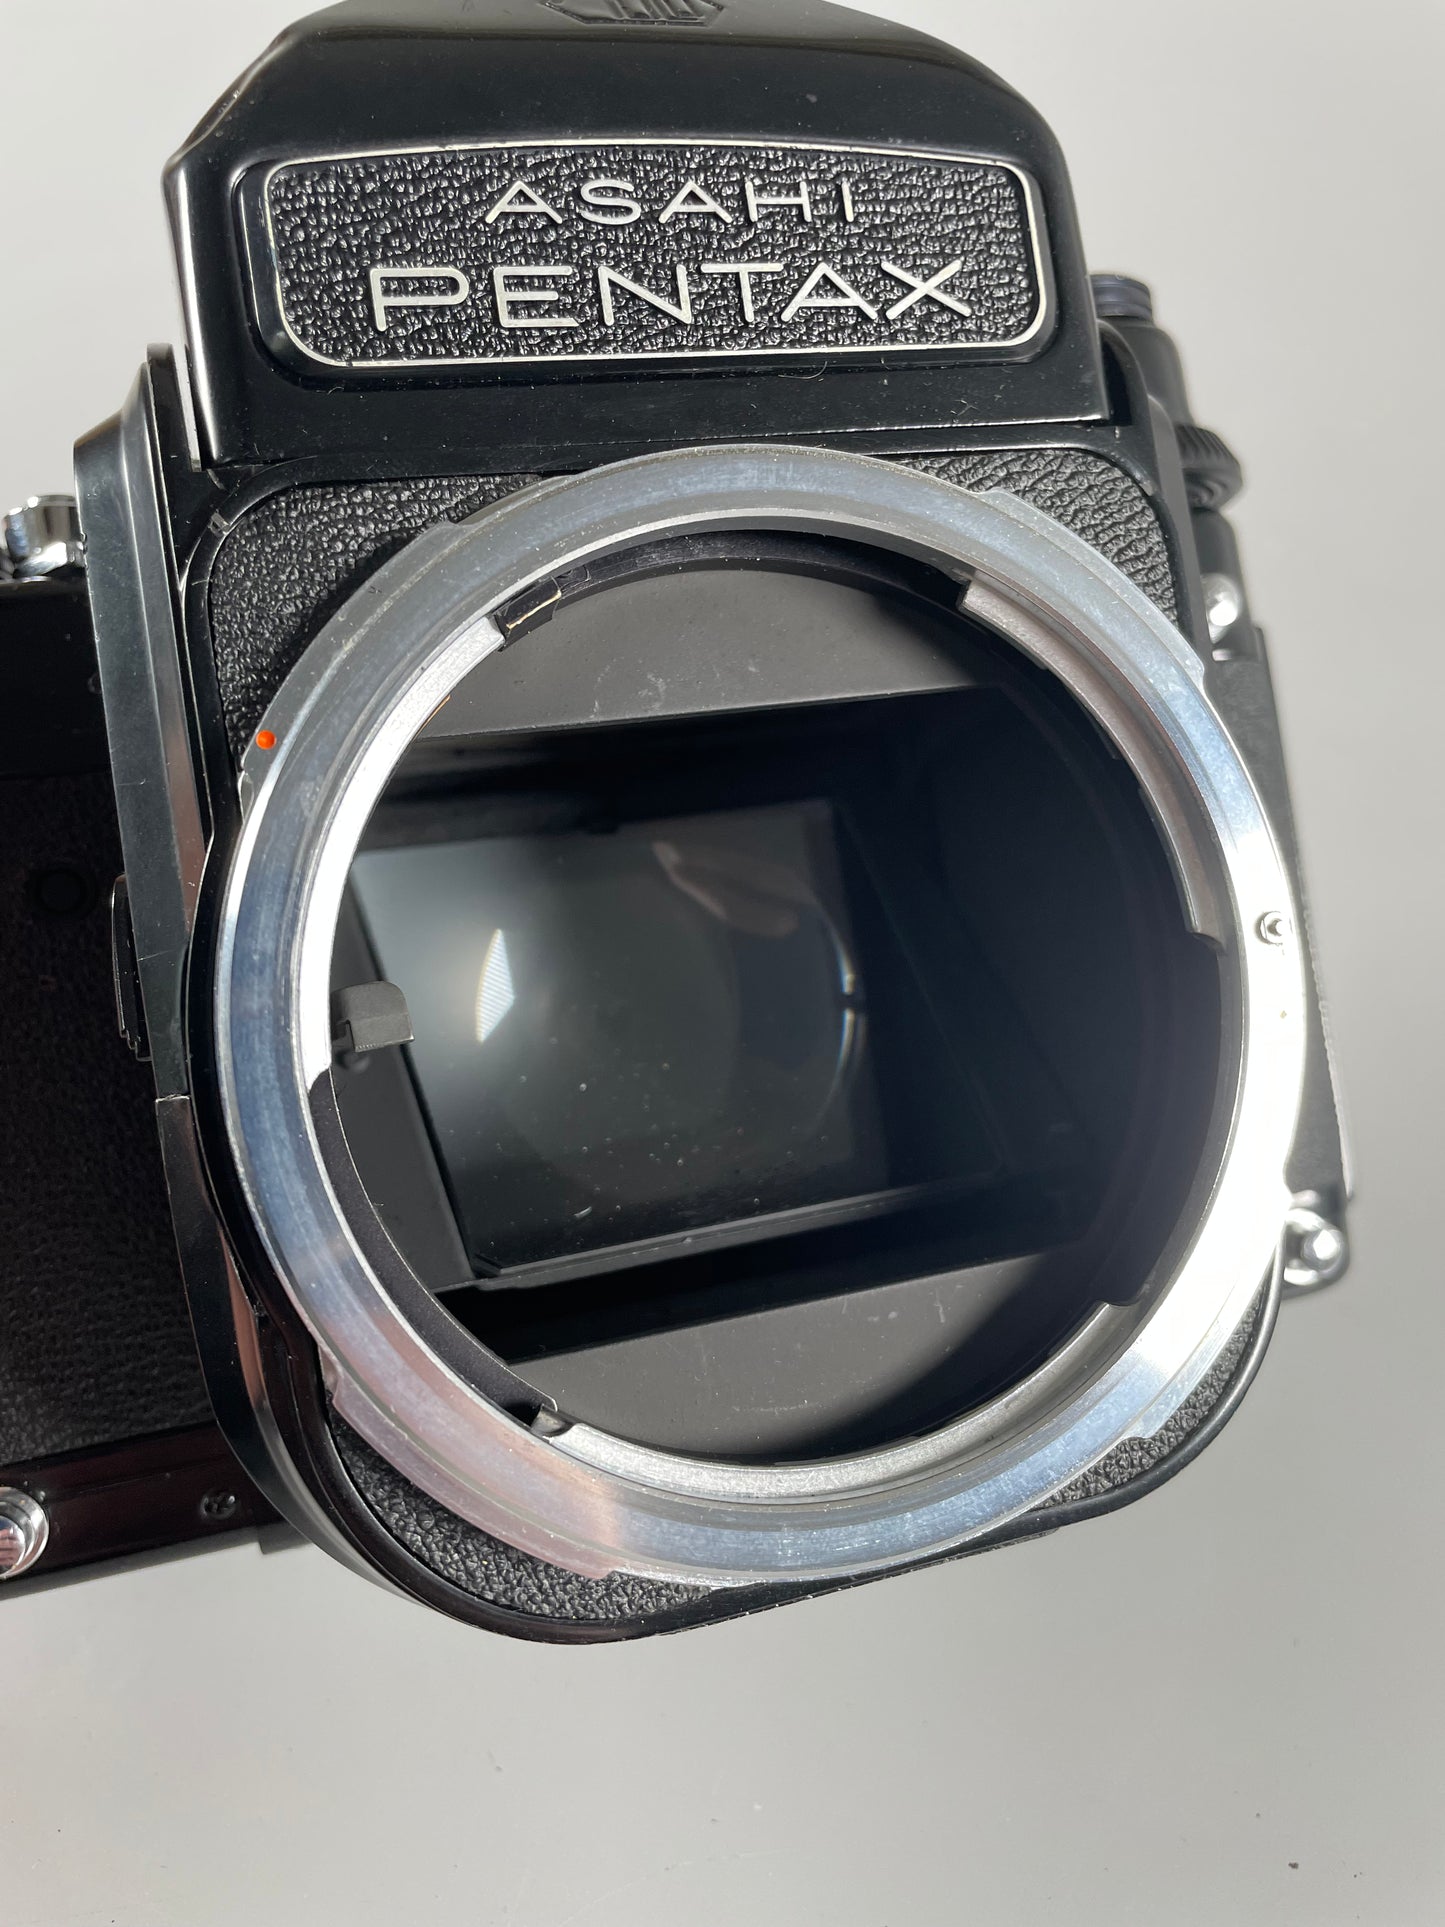 Pentax 67 6x7 Mirror Up MLU Body with metered prism